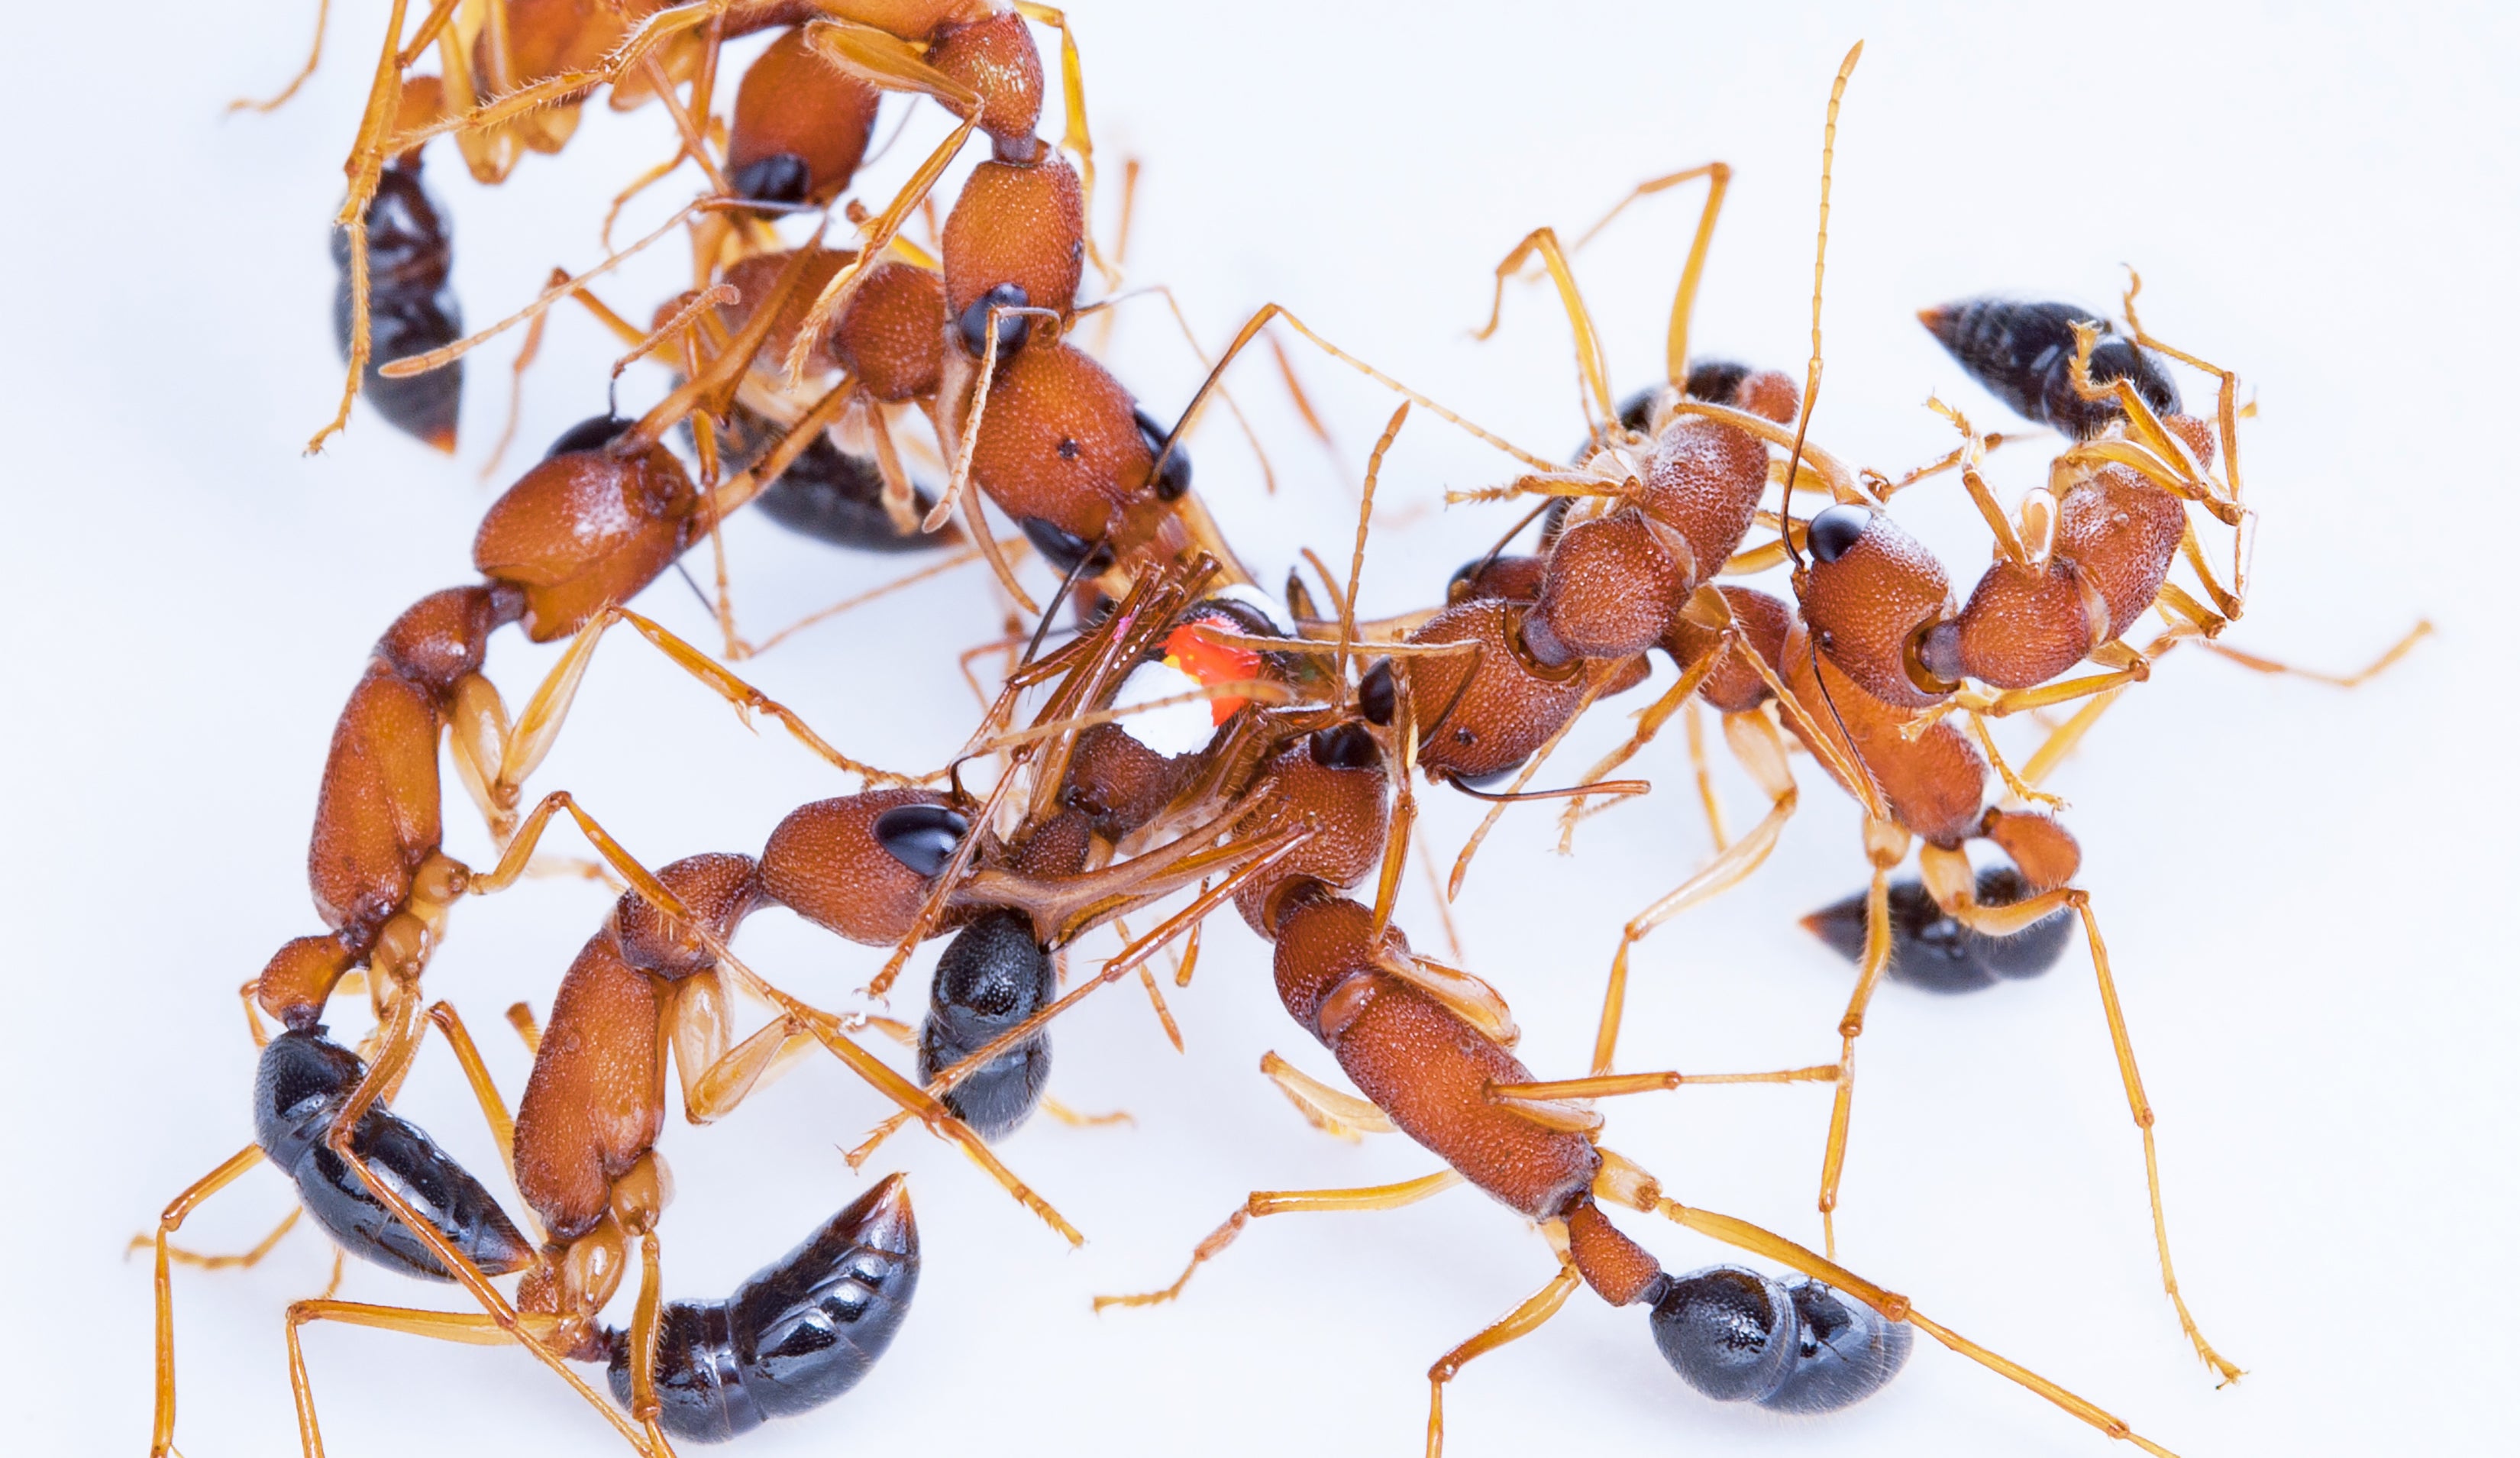 Indian jumping ants can shrink and unshrink the size of their brains